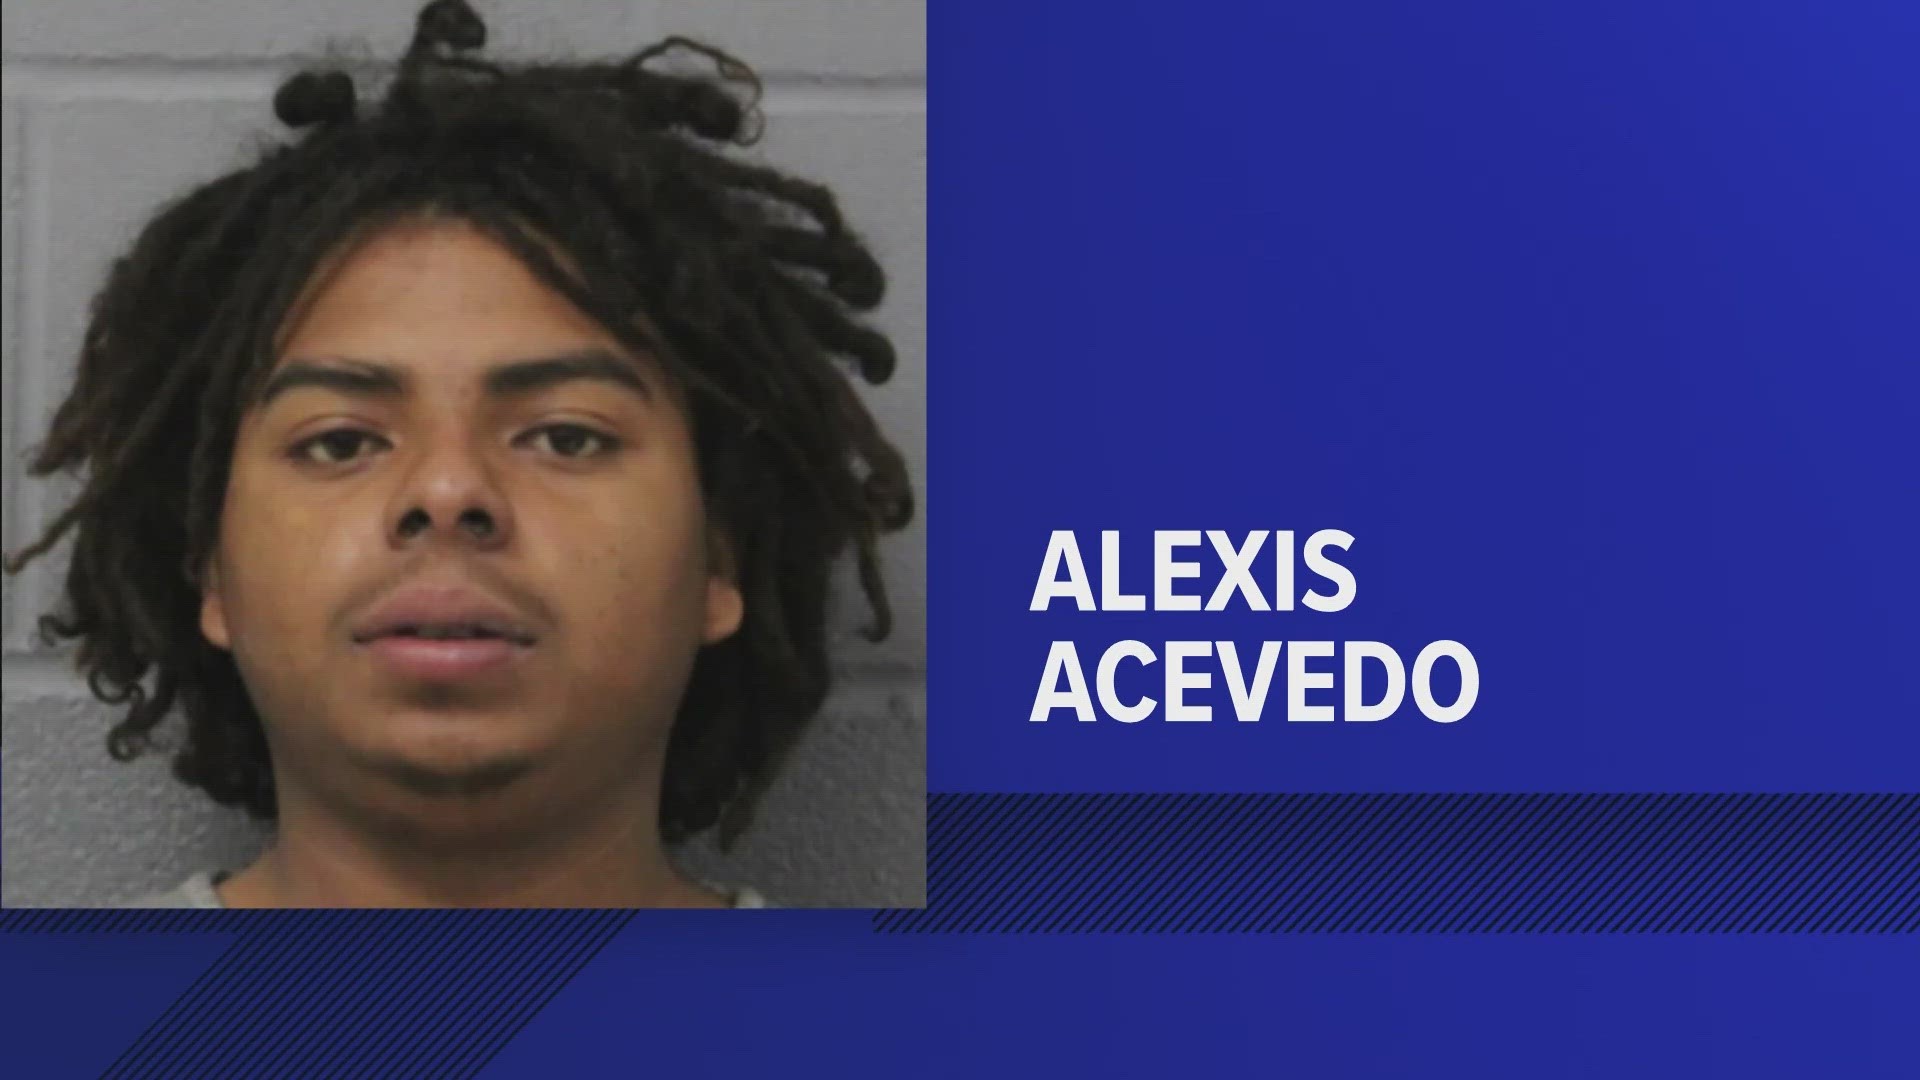 Court records show 19-year-old Alexis Acevedo was arrested and charged with two felonies following the deadly crash.